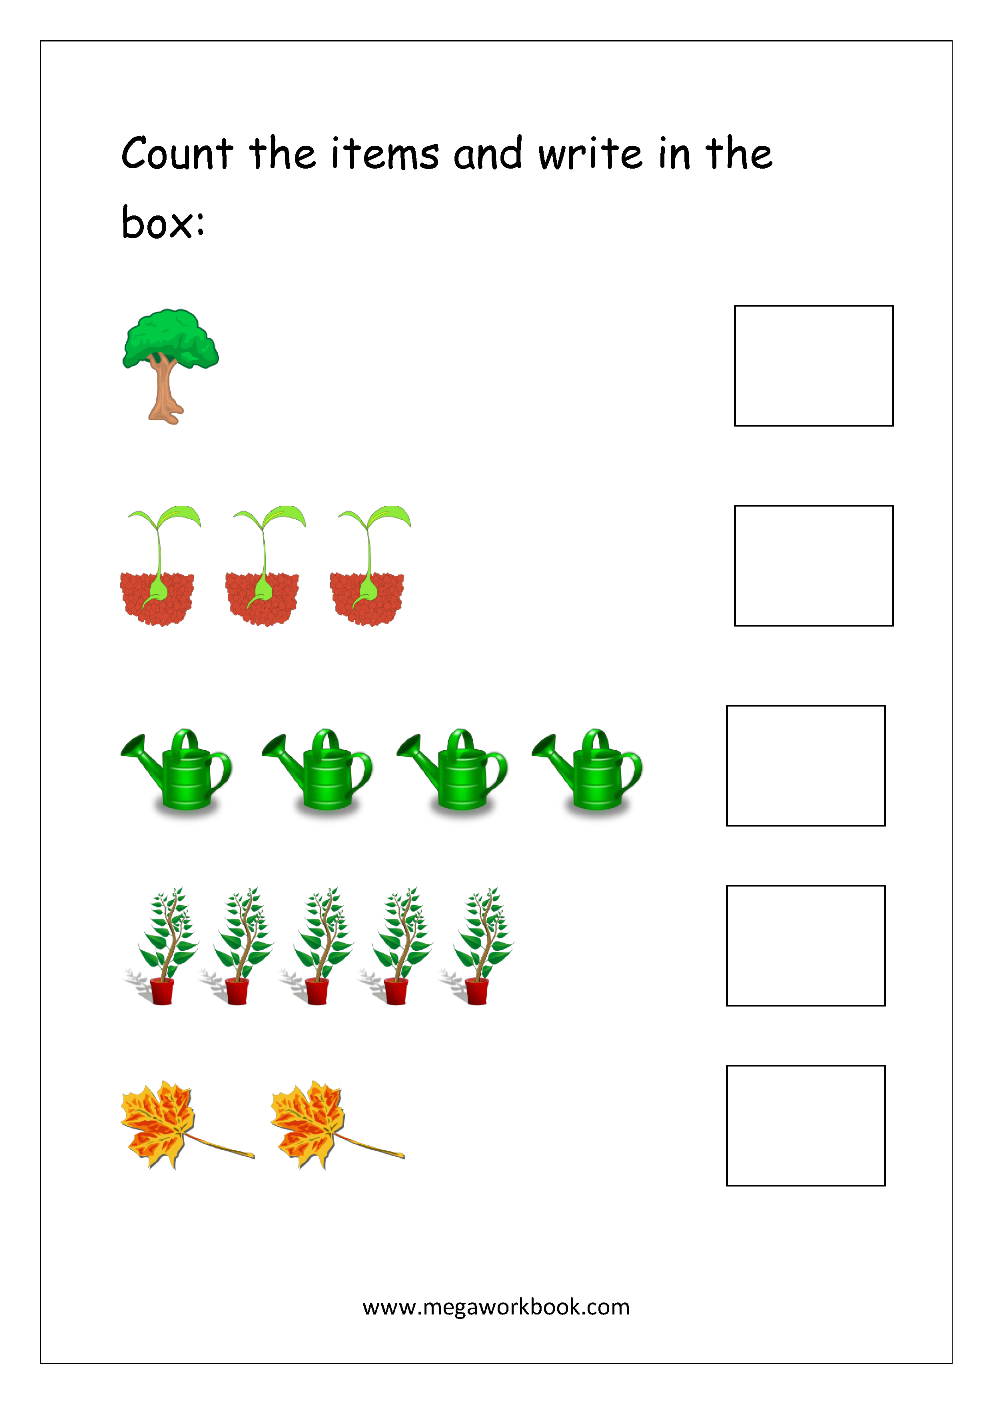 Free Printable Number Counting Worksheets - Count and Match - Count and ...